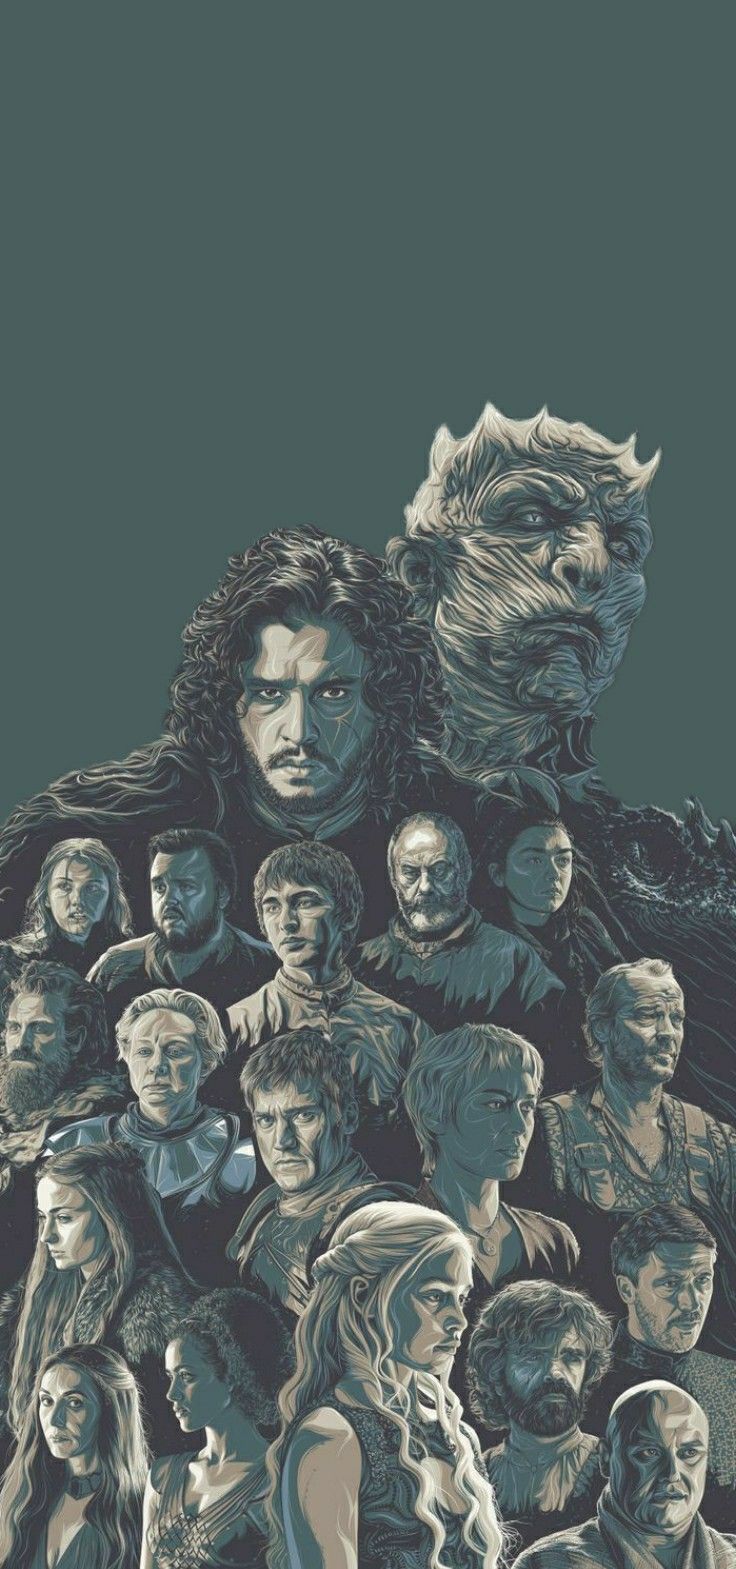 Game Of Thrones WallPaper HD. Art, Got game of thrones, Painting